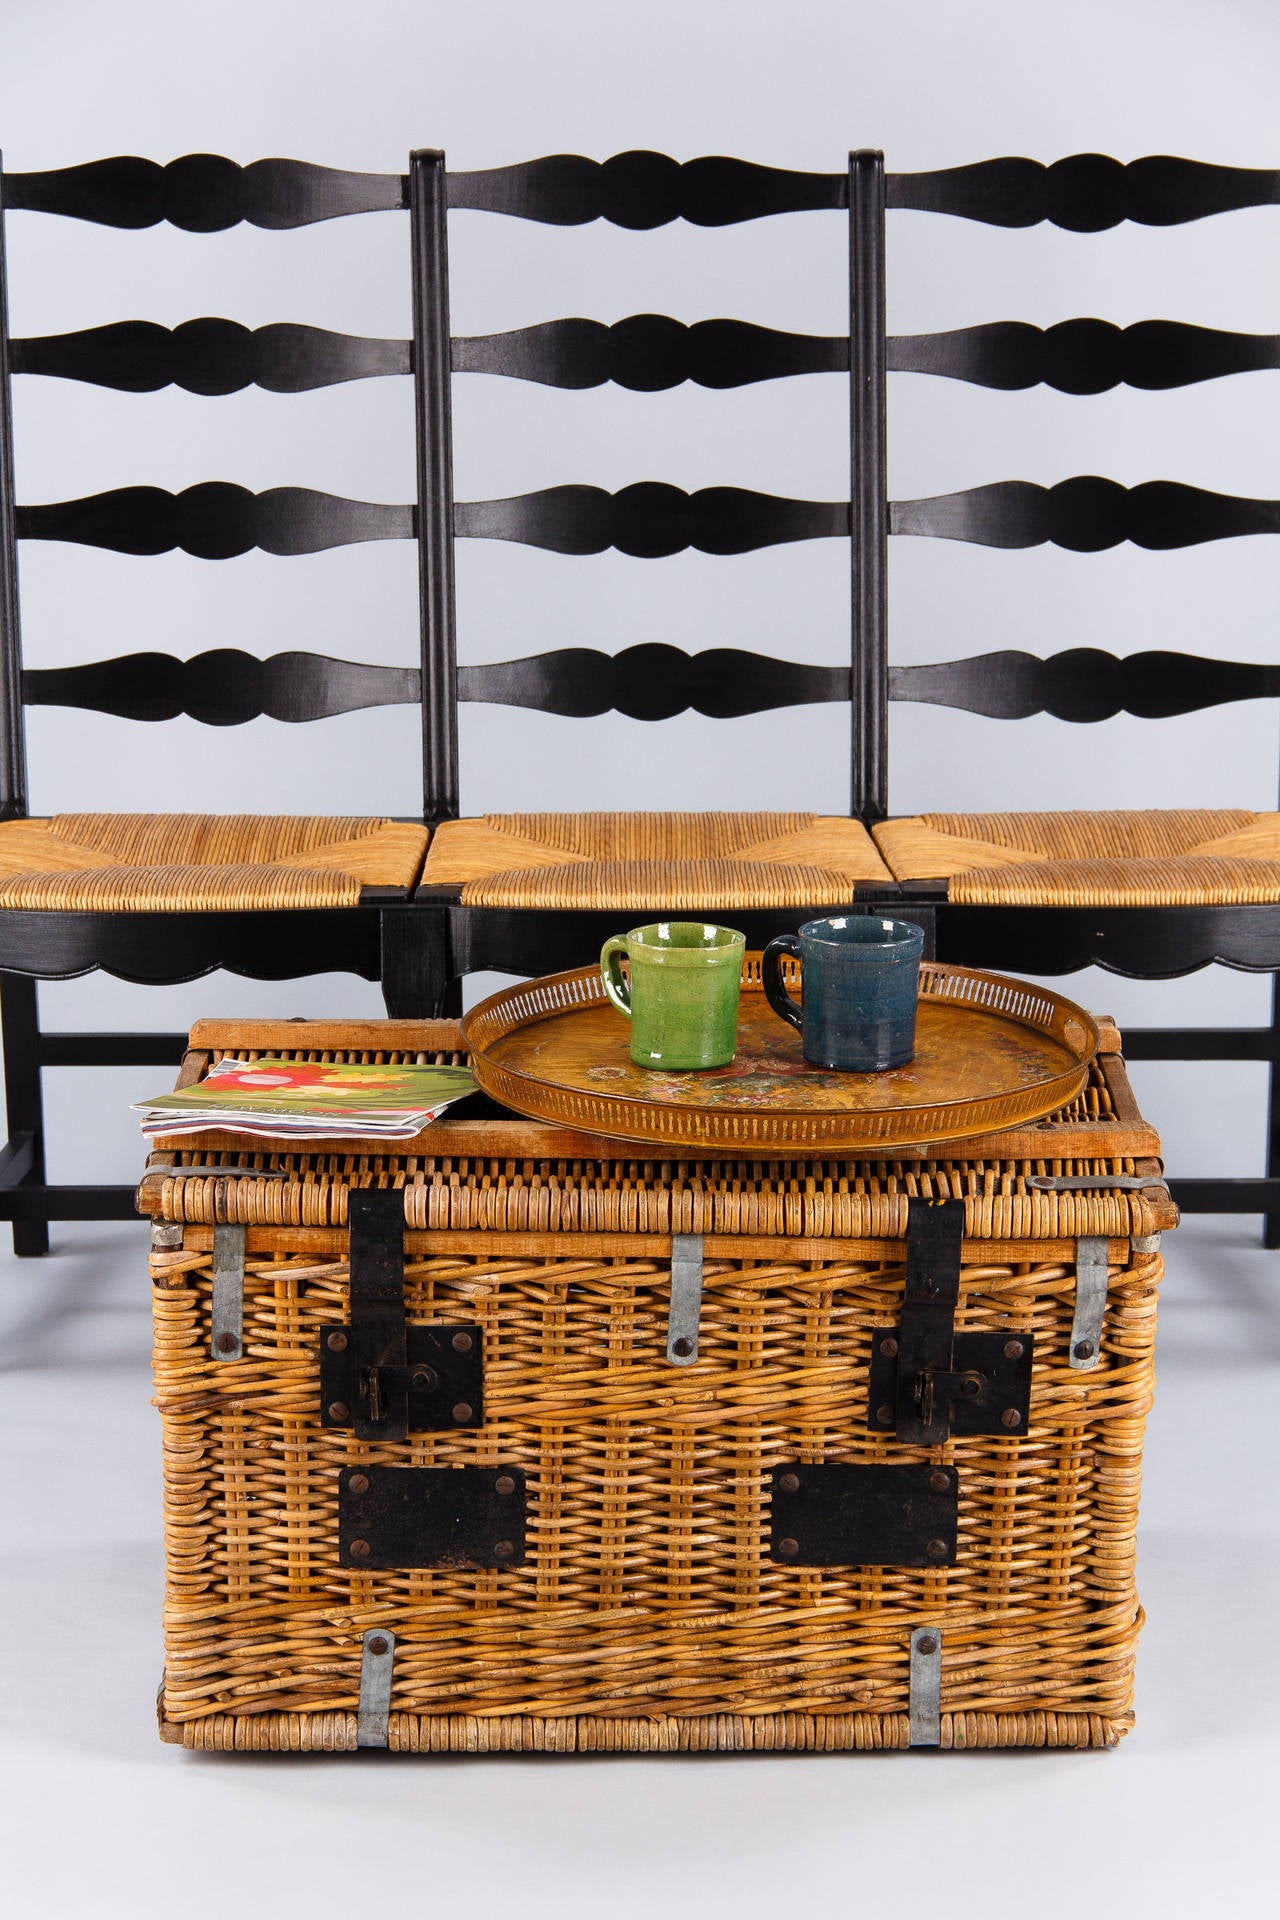 A traveling trunk from the Rhone Region made of wicker with black iron locks and handles. A great piece for storage or as a coffee table!